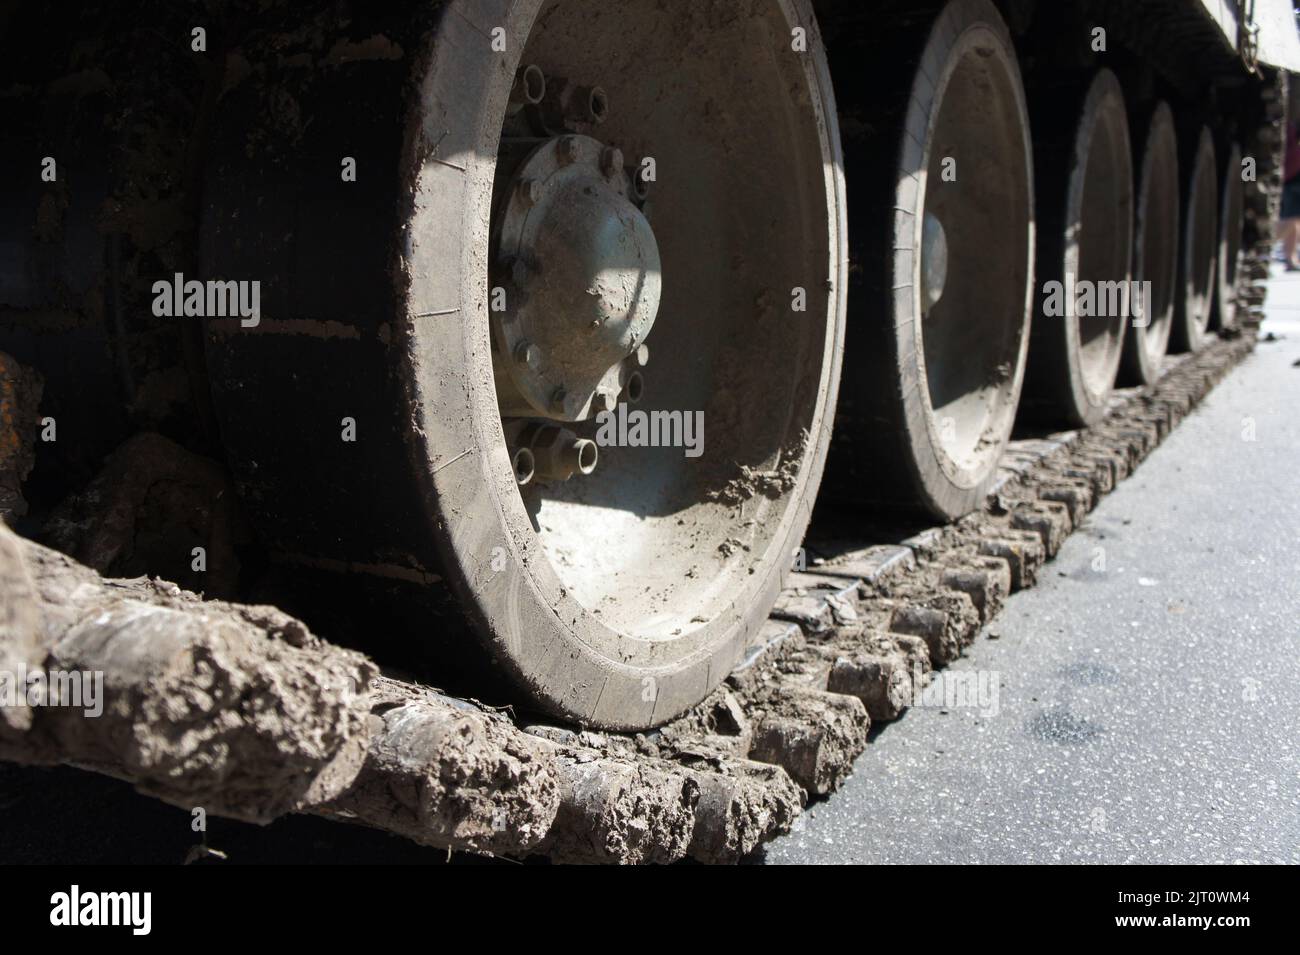 Tank track. View of the front part of the green caterpillar of the tank standing on the ground with the wheels close-up Stock Photo